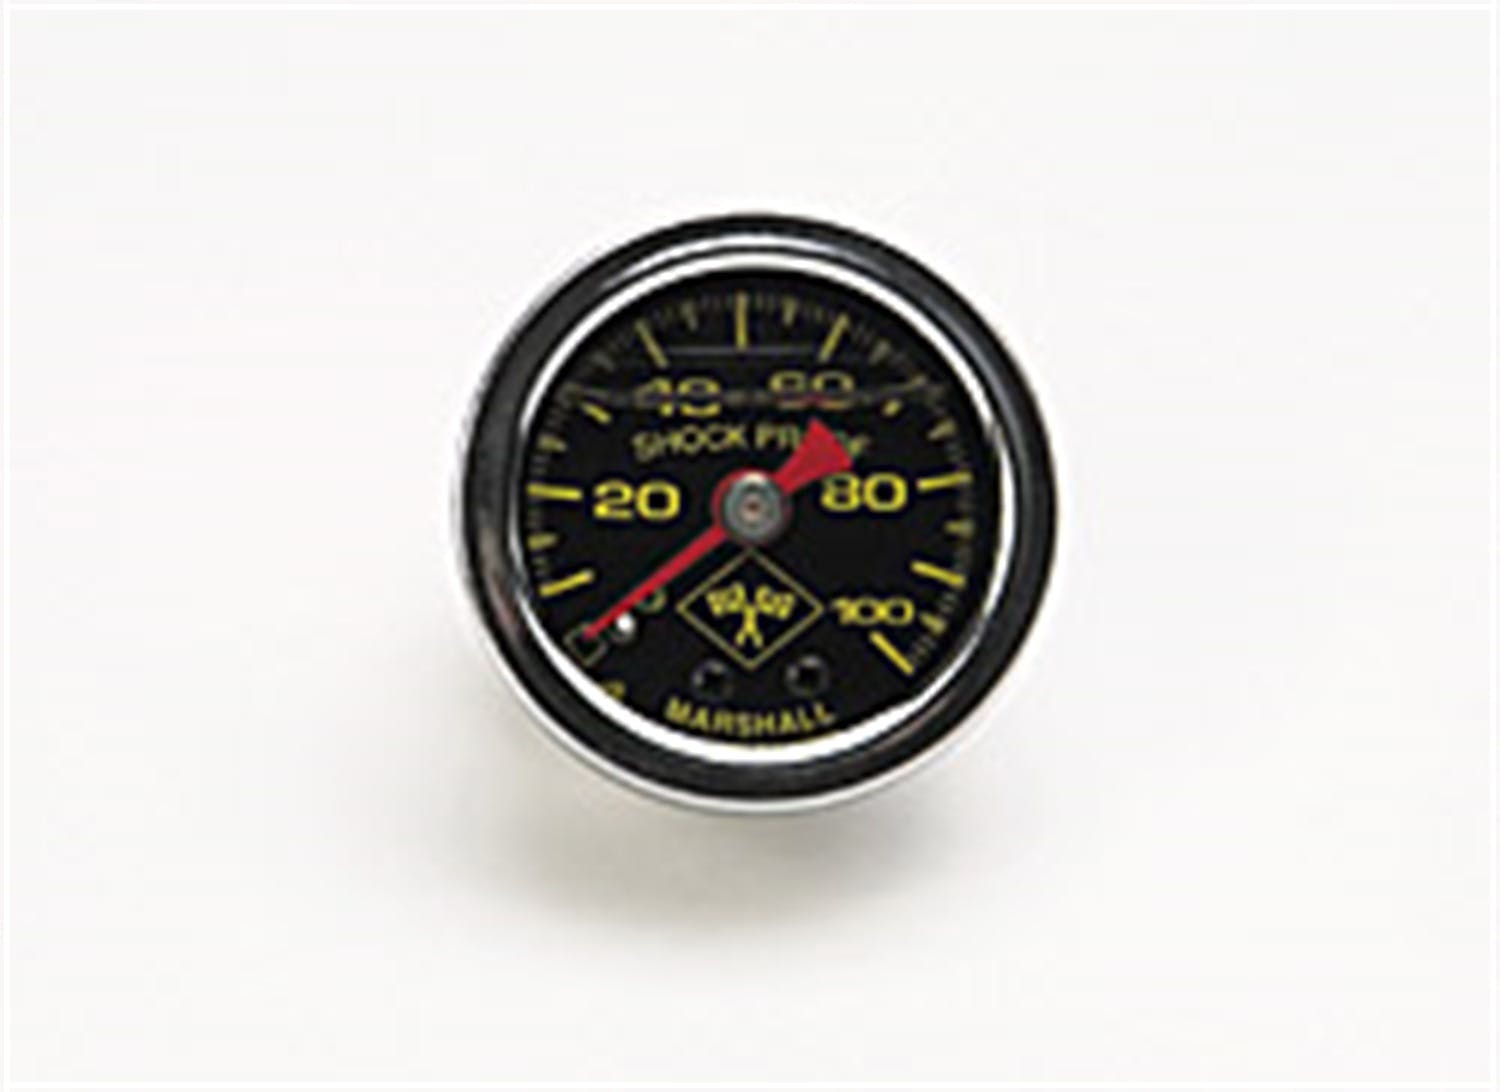 Russell 650320 MNS Series 0-100 PSI Silicone Filled Fuel Pressure Gauge W/ 1/8 NPT Male In